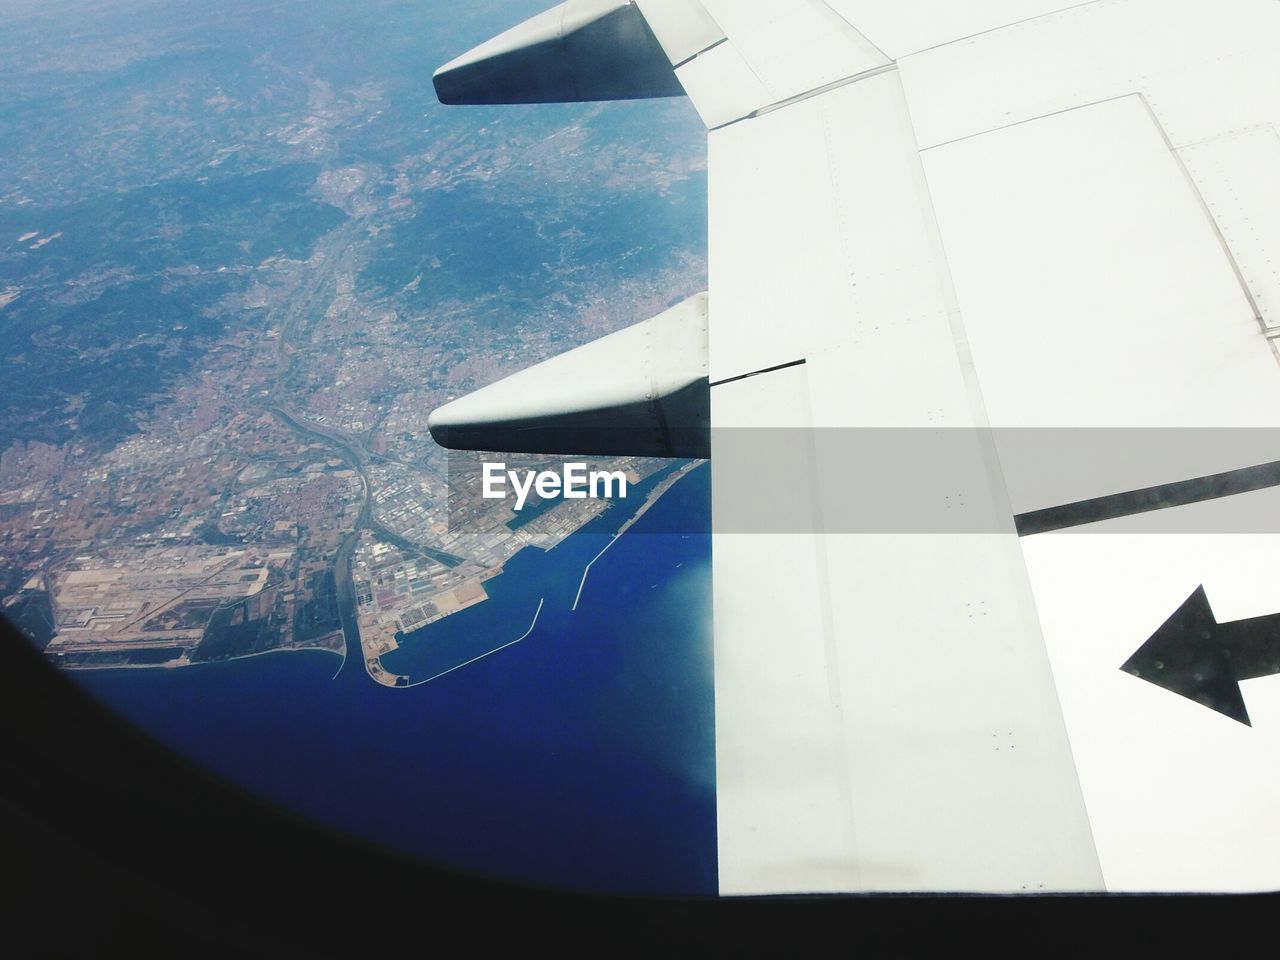 Cityscape seen through airplane window flying over sea